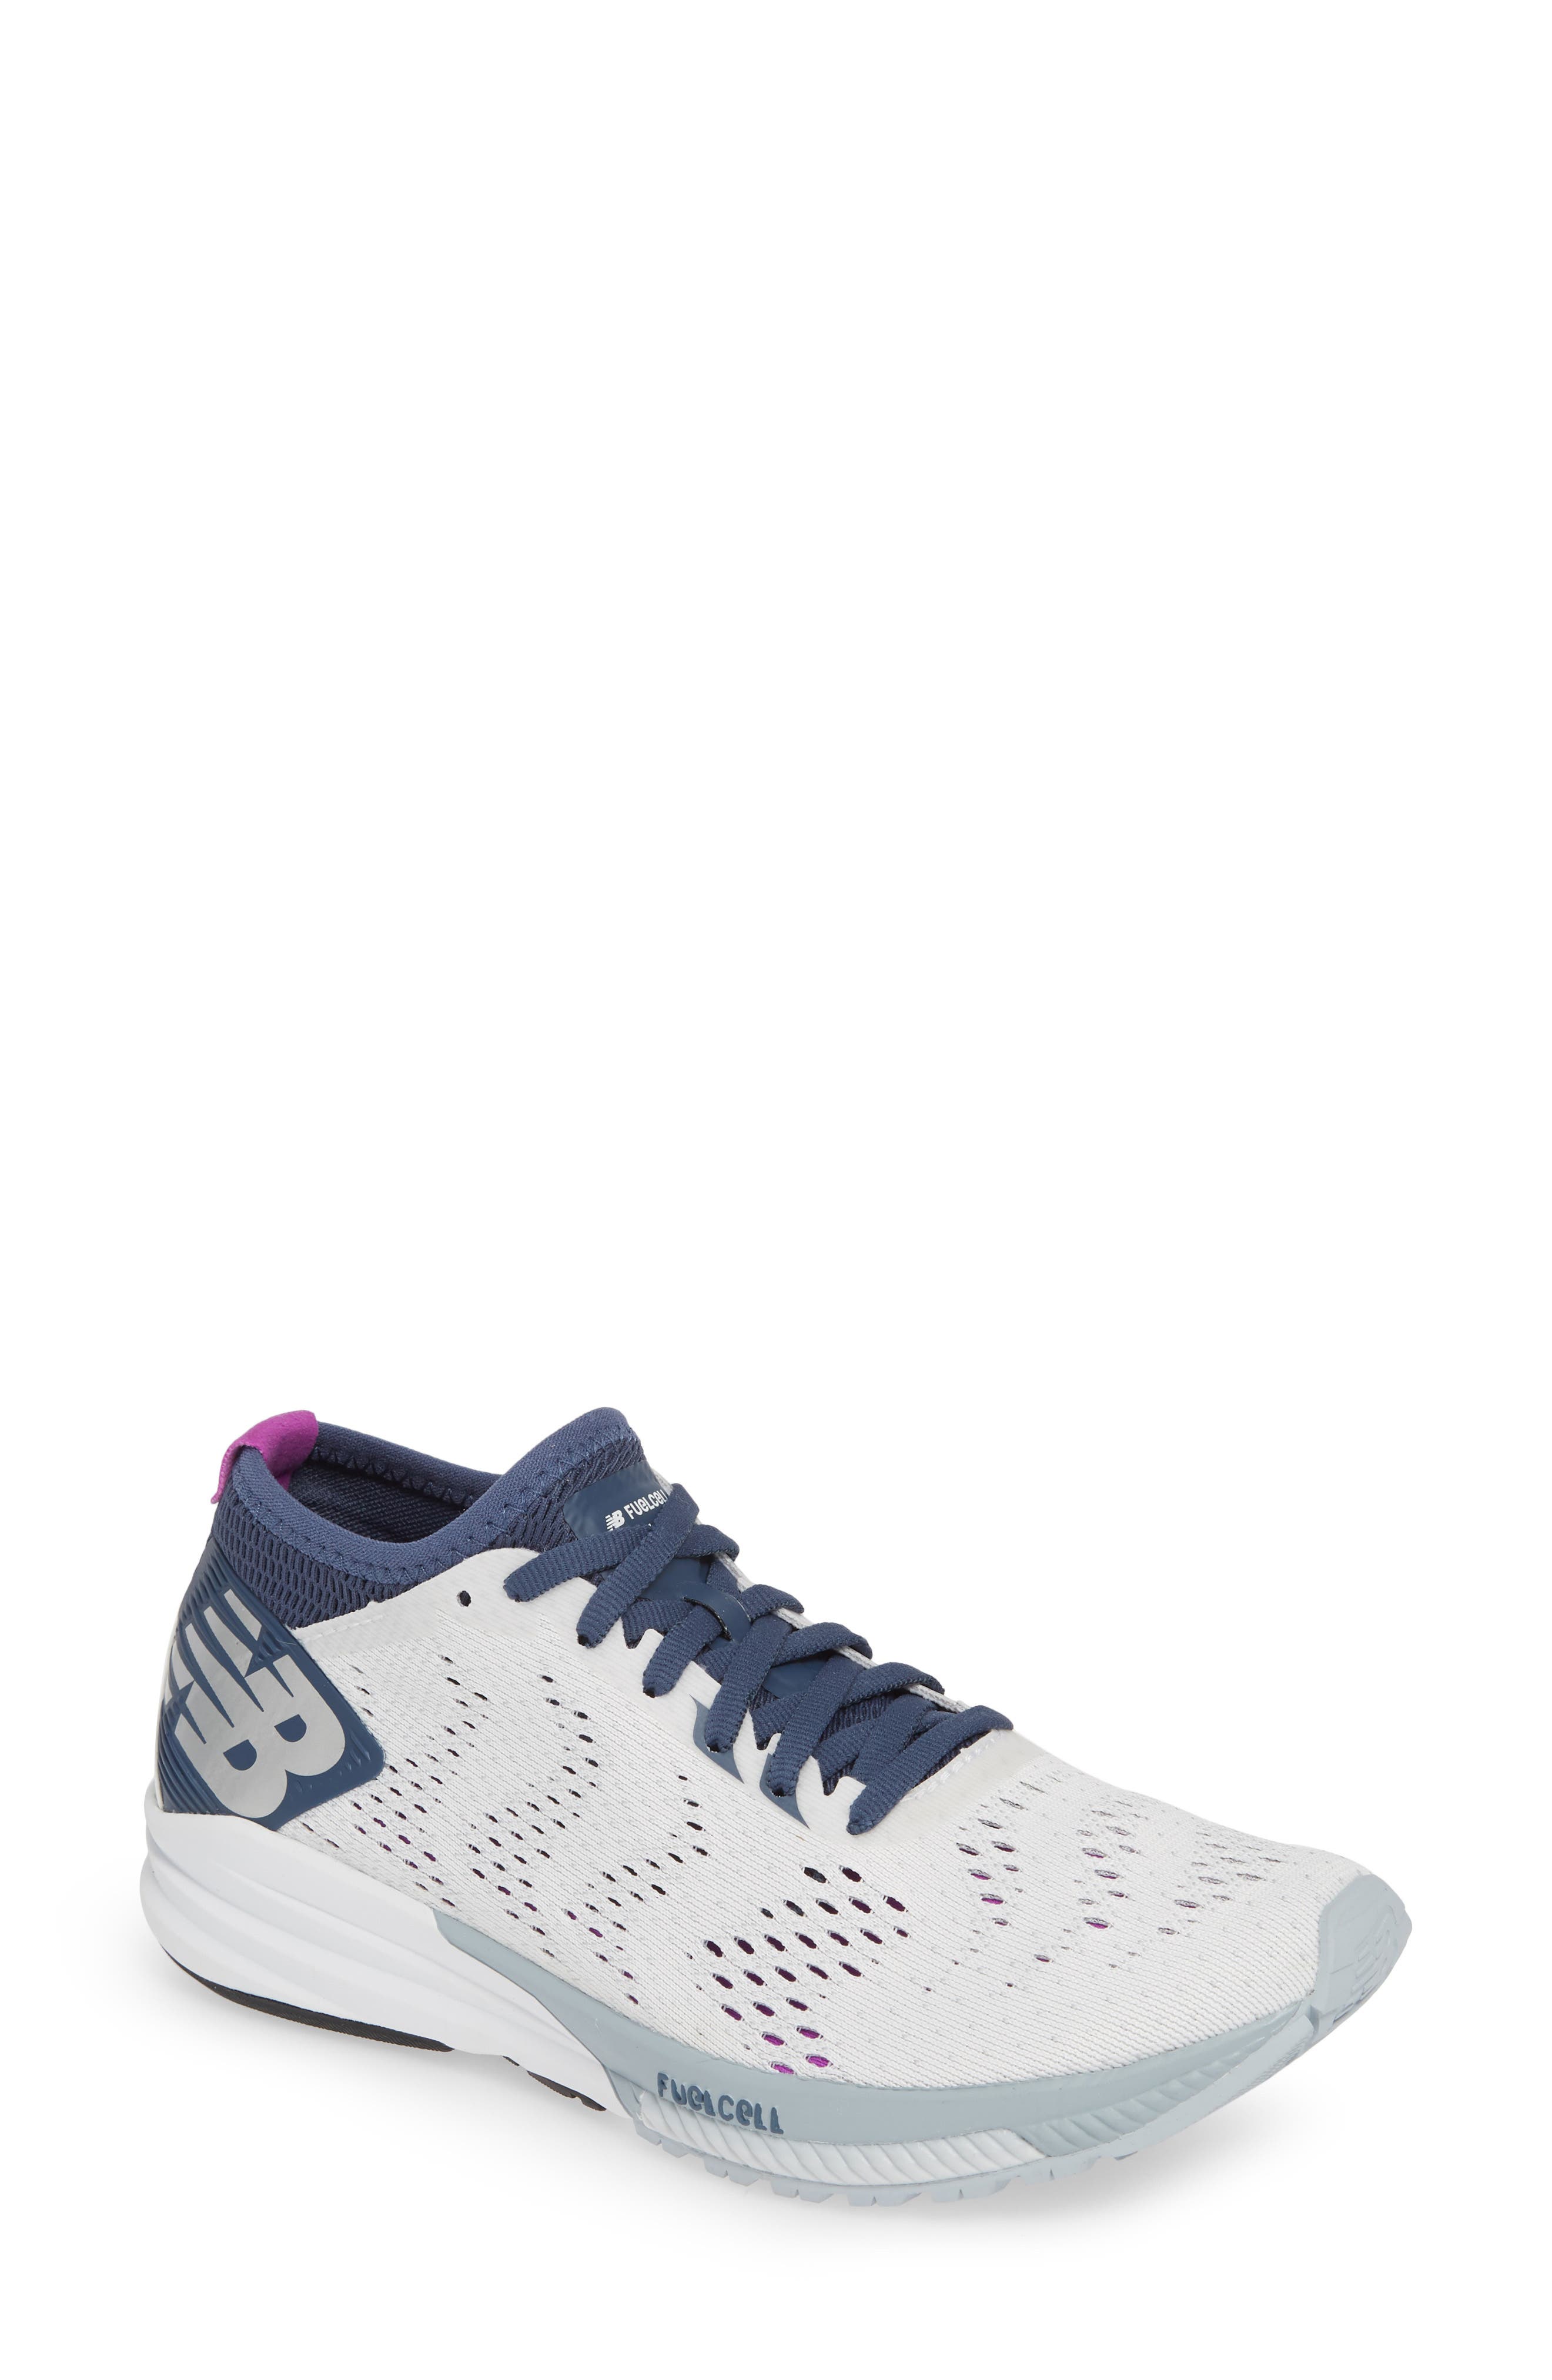 tenis new balance fuelcell impulse